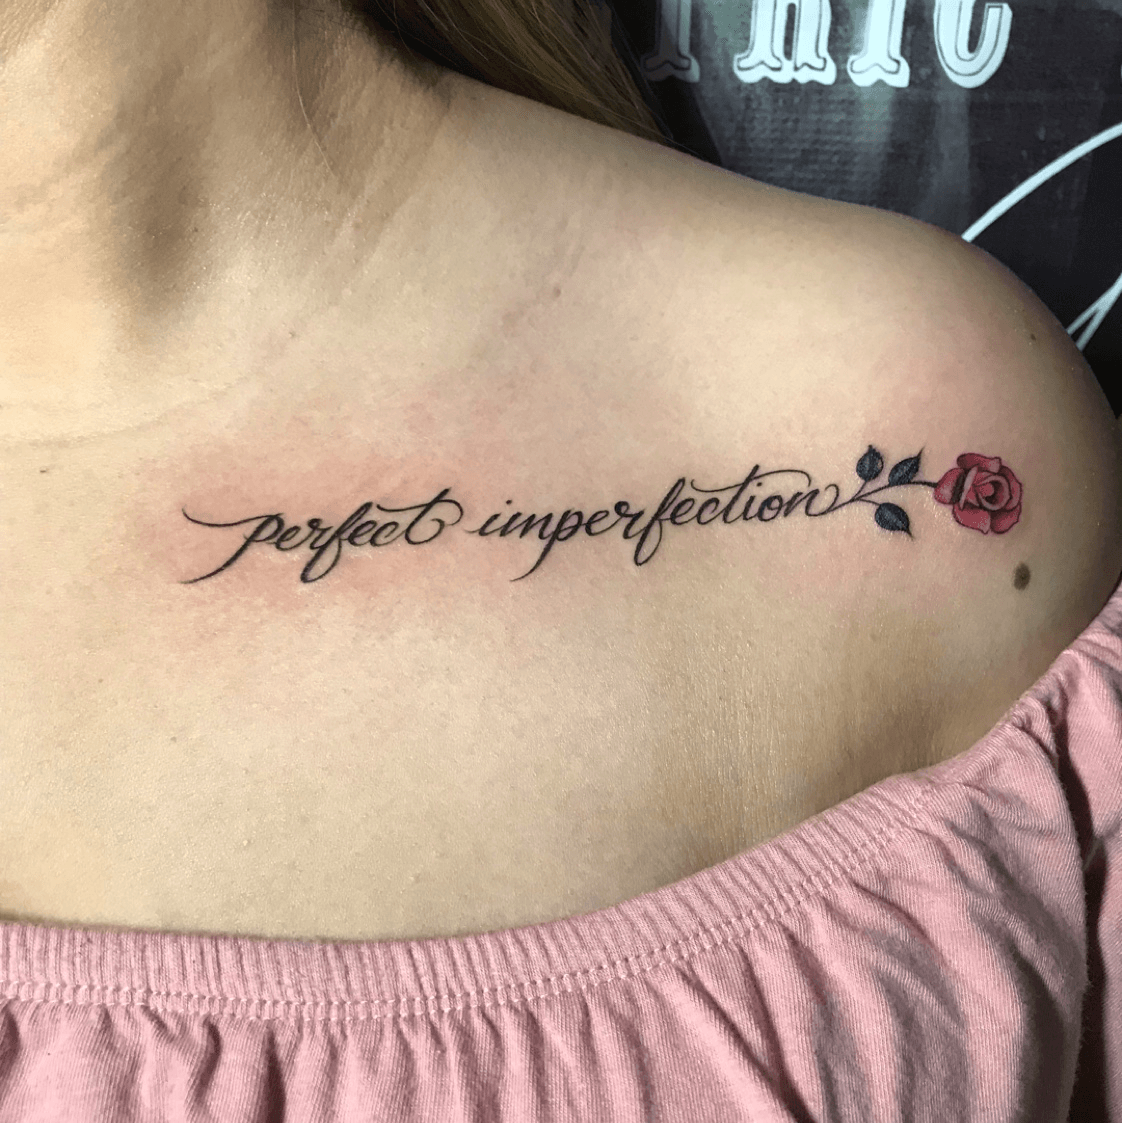 Perfectly imperfect lettering tattoo on the bicep